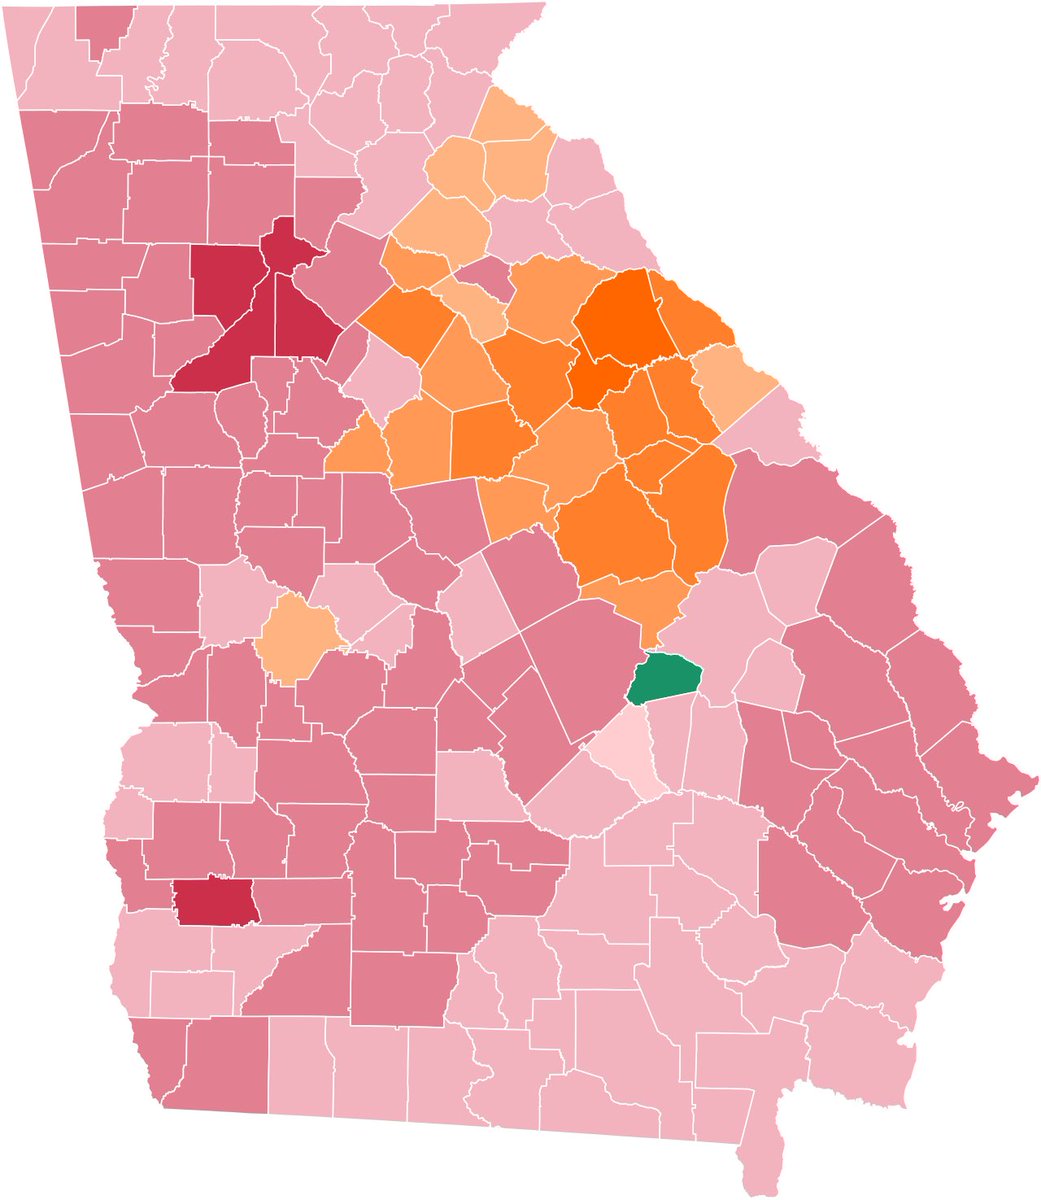 in 2058, the Republican-NPL candidate Jon Ossoff wins the state of Georgia against America First candidate David Perdue and Green Libertarian candidate Shane Hazel. Ossoff won with 52% of the vote against Perdue's 33% and Hazel's 8% of the vote. https://t.co/LxTPEK6sEN